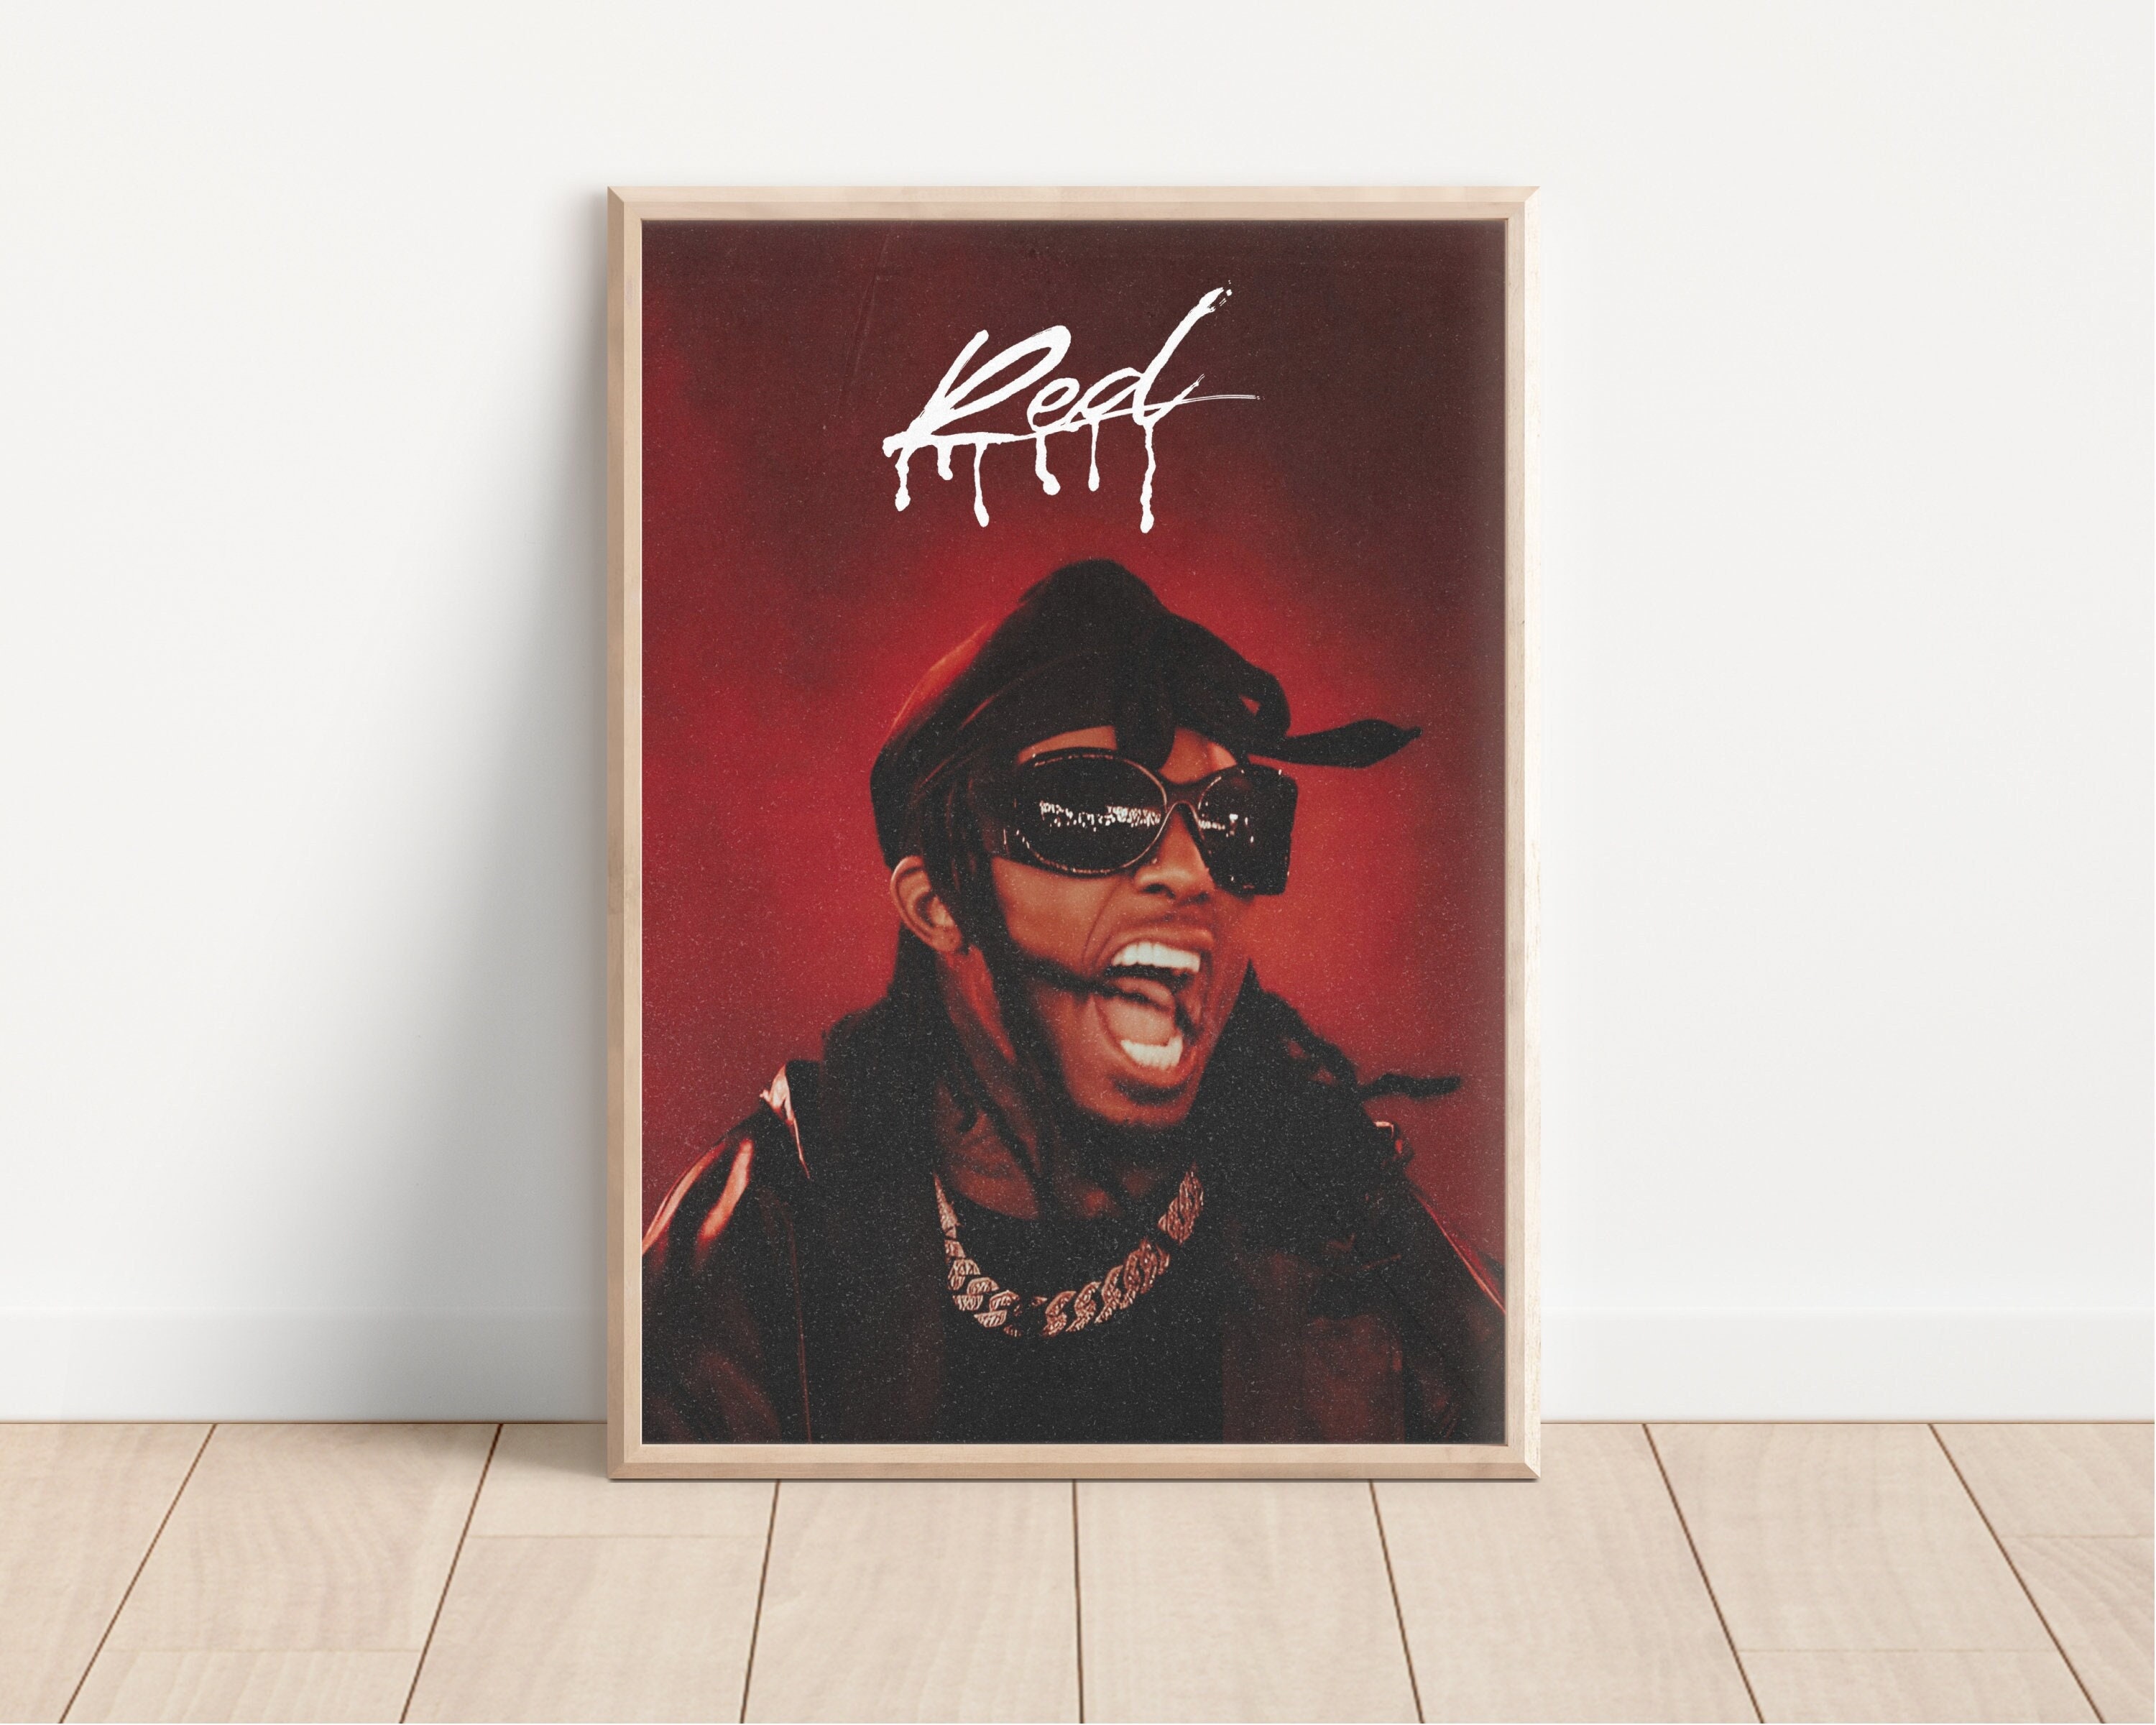  LHTX Playboi Carti Posters - Whole Lotta Red,Anime Girls Office  For Men Master Bedroom, 16''x24'': Posters & Prints